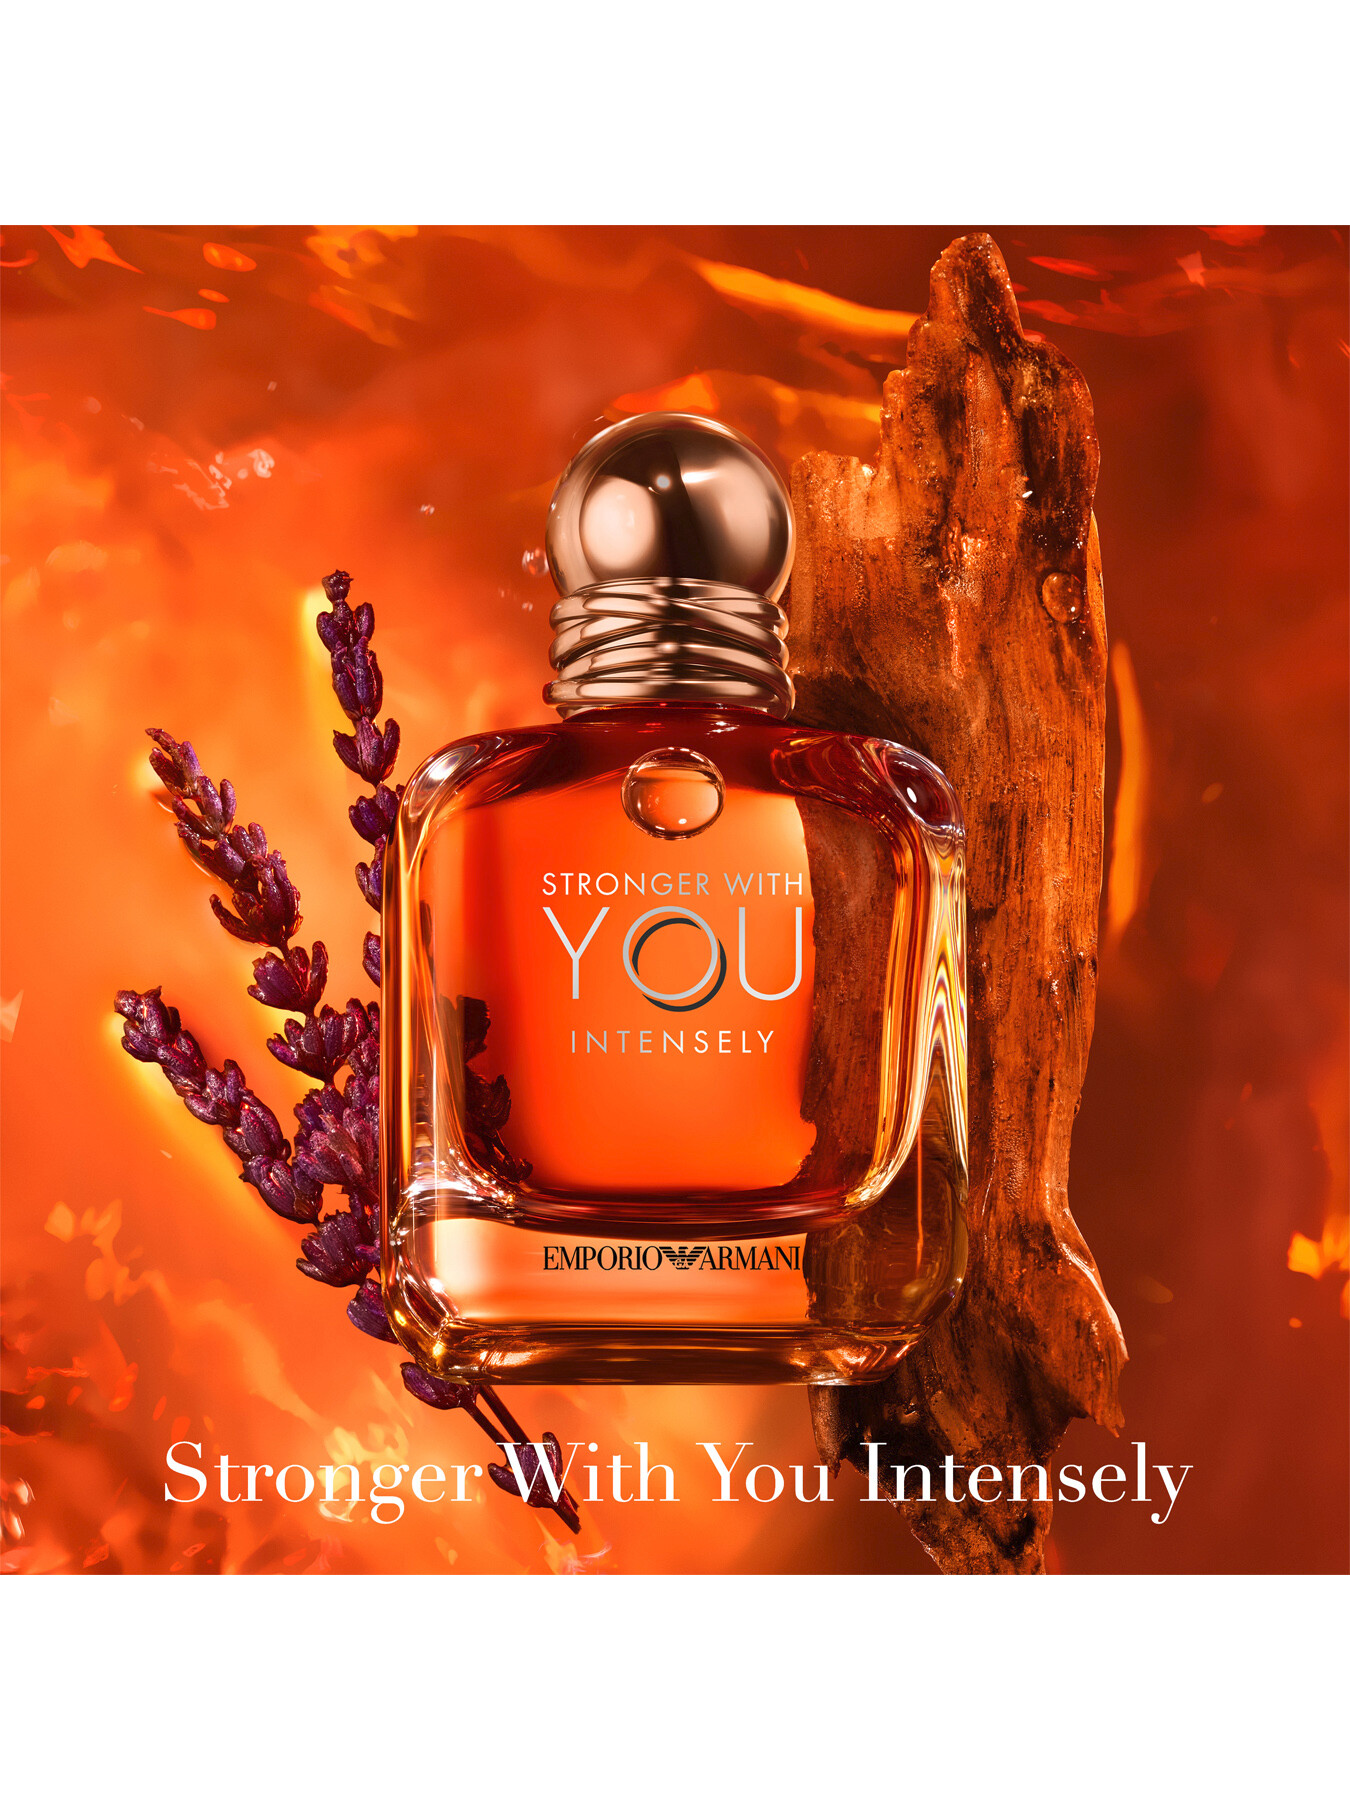 Giorgio Armani Stronger With You Intensely advertisment.